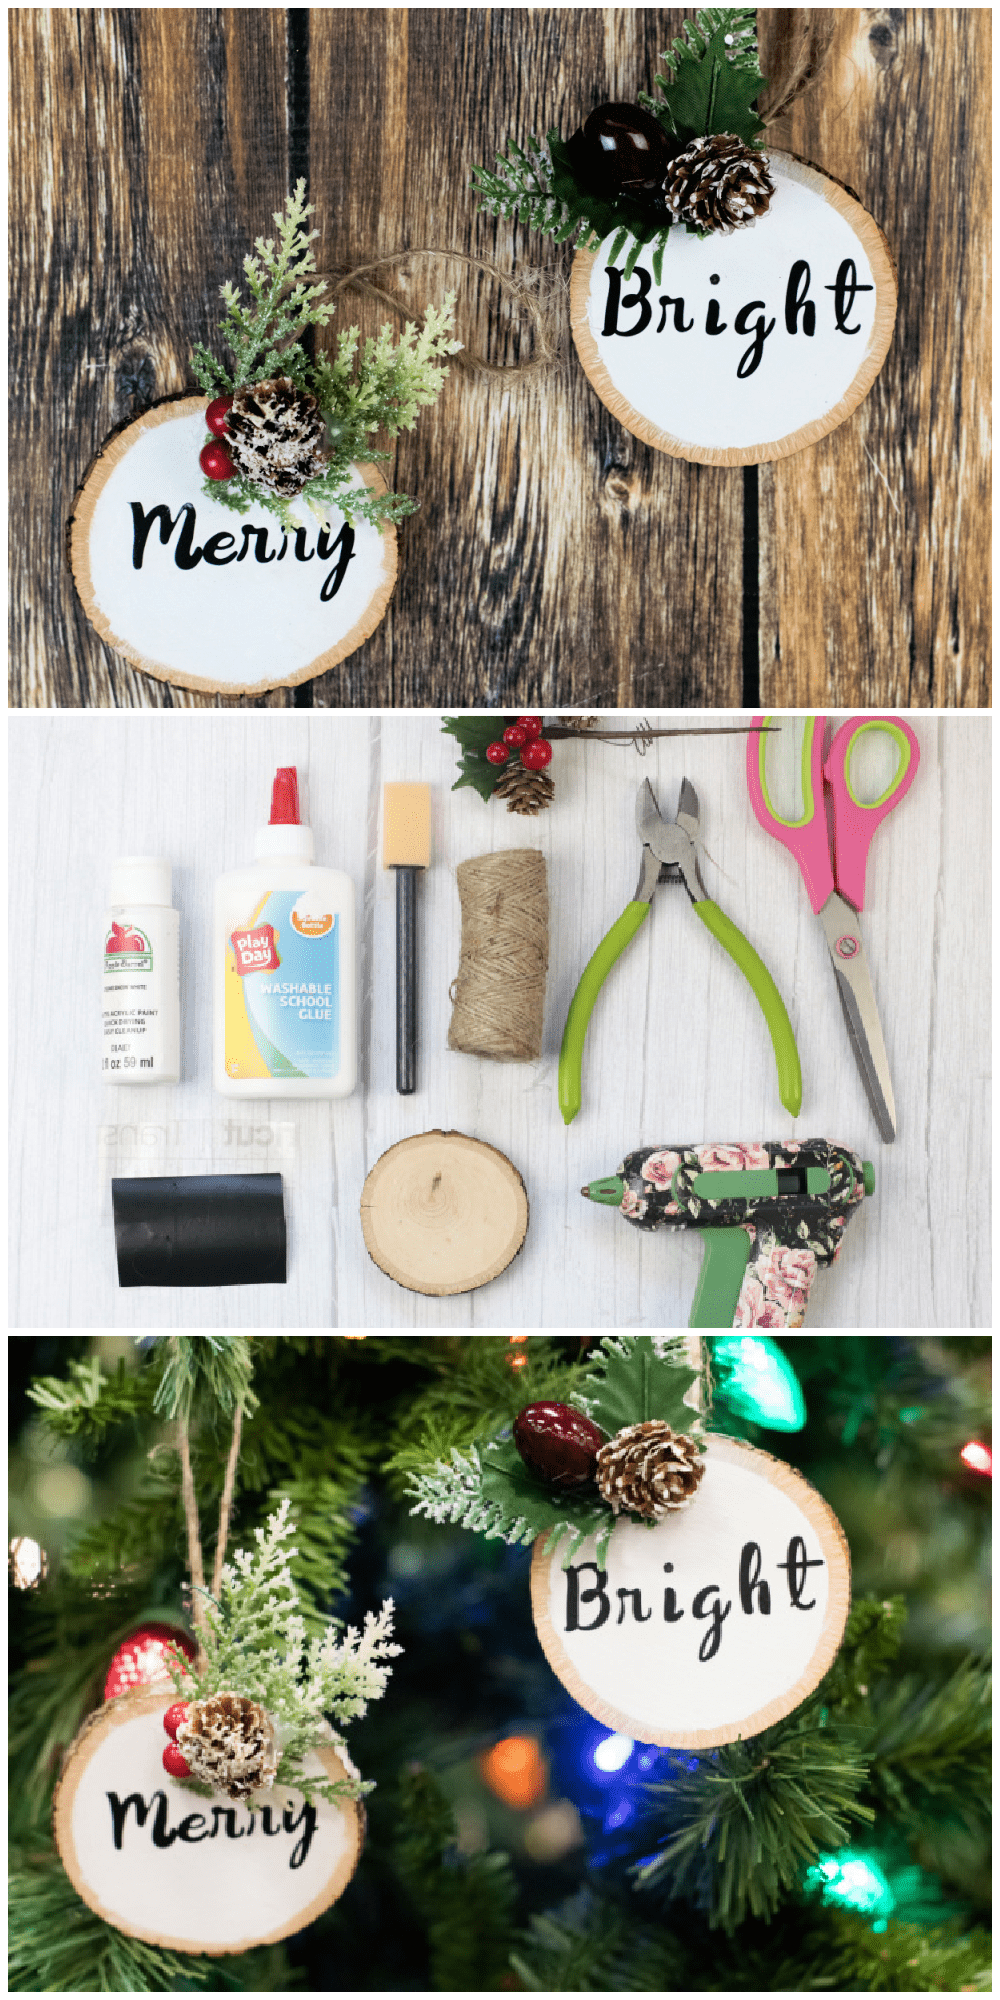 Make your own festive wood circle ornaments using your Cricut machine and this easy step-by-step tutorial. via @jugglingactmama